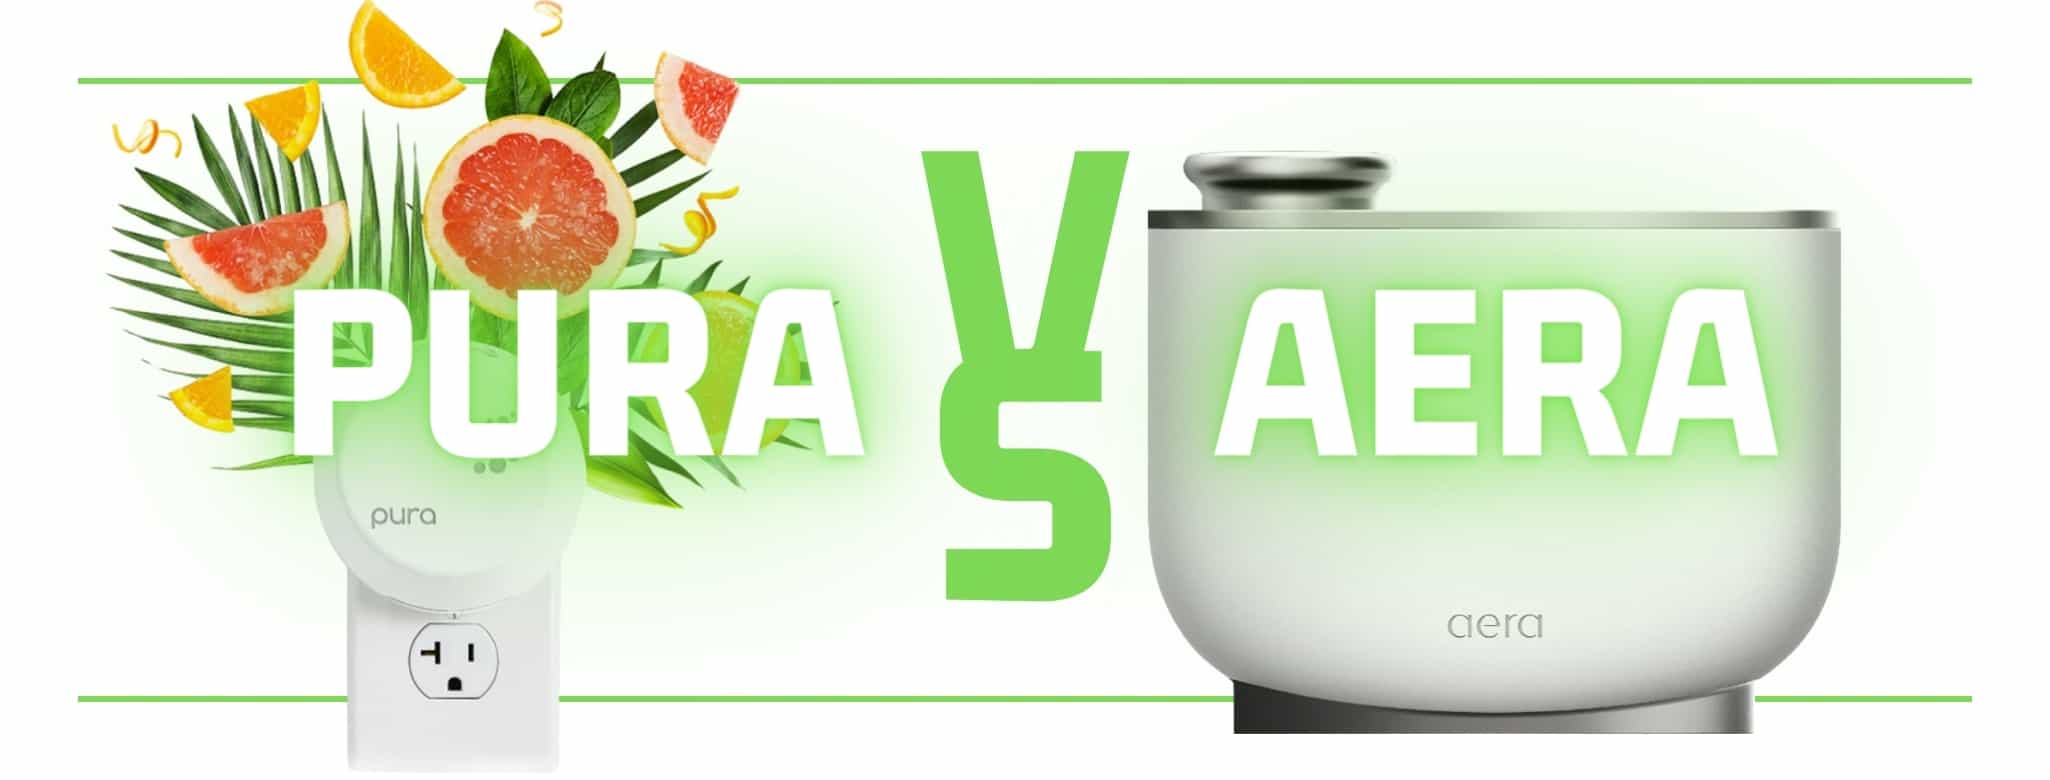 Pura vs Aera - The 8 things you absolutely need to know before buying either Aera or Pura 1